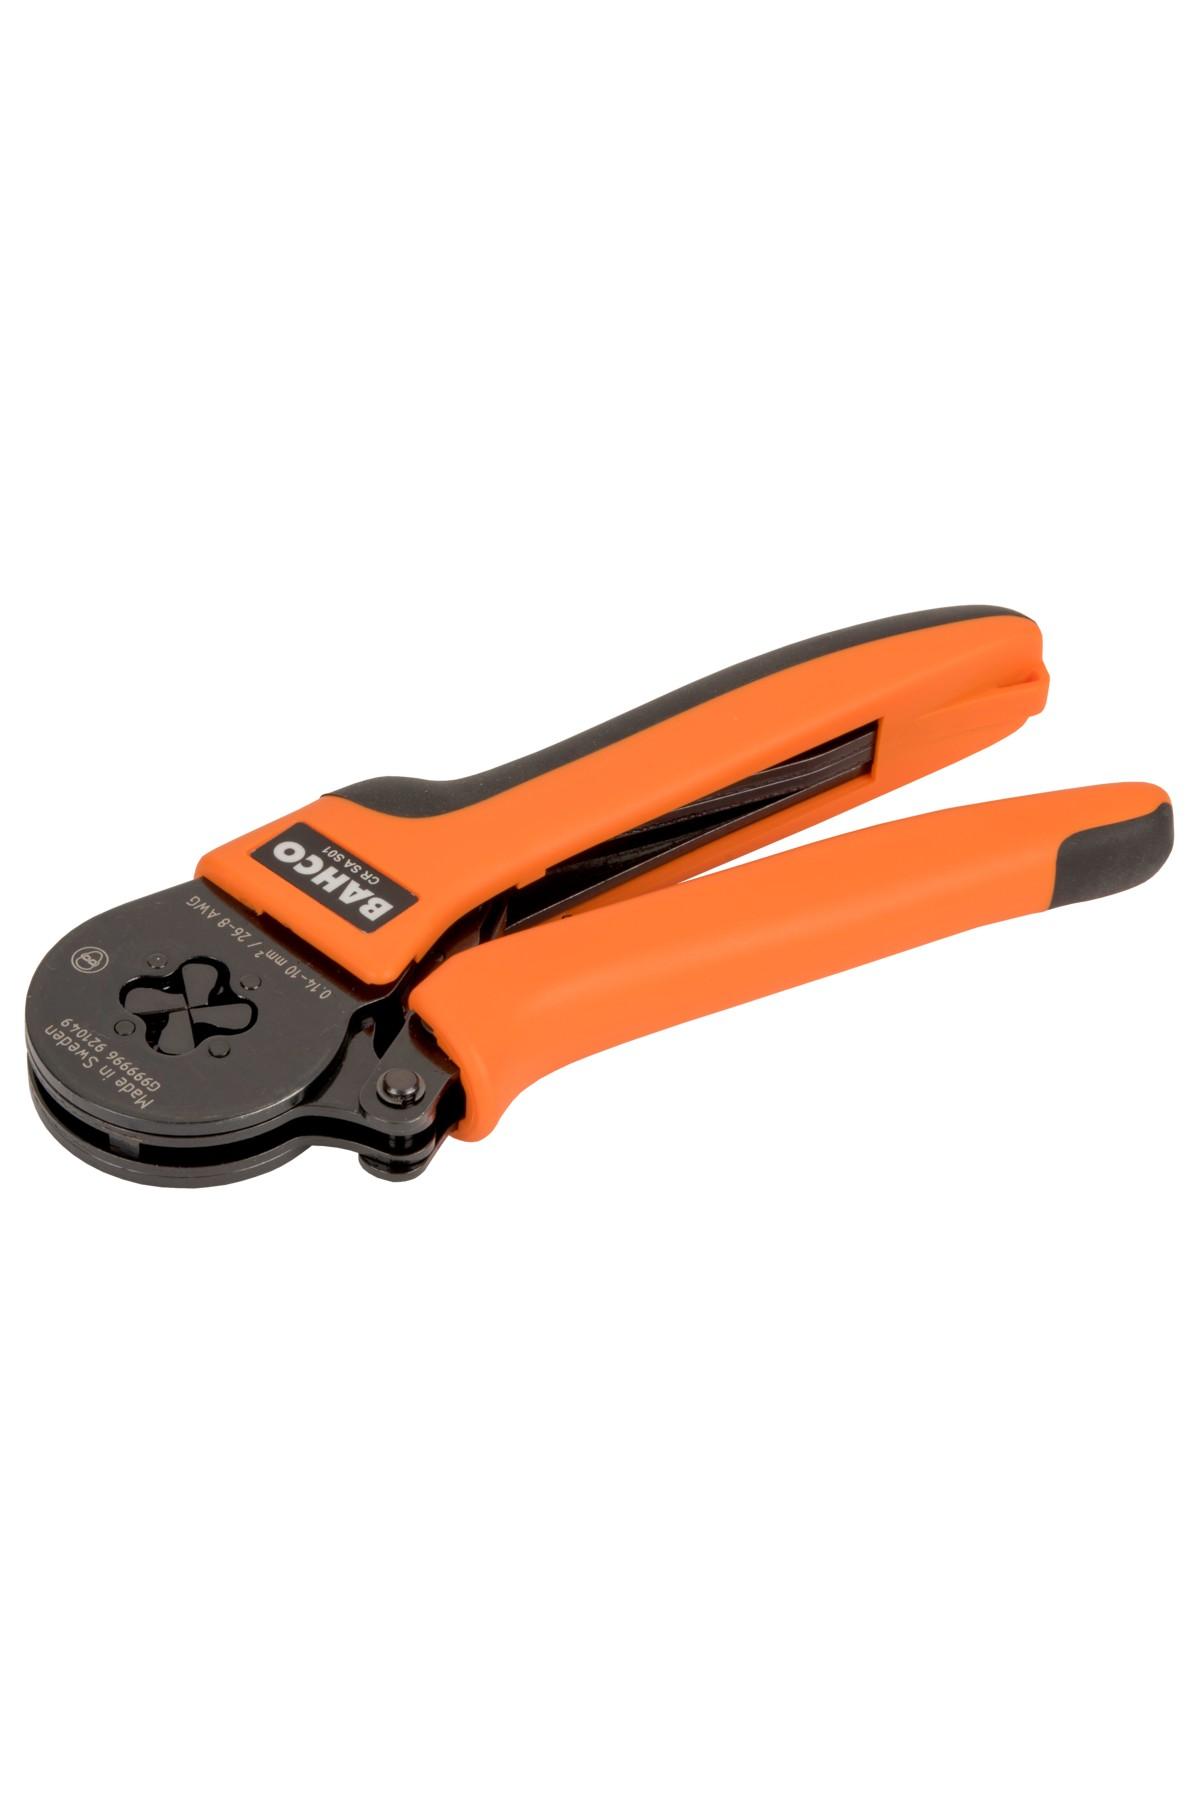 Crimping pliers with self-adjusting jaws - Square profile